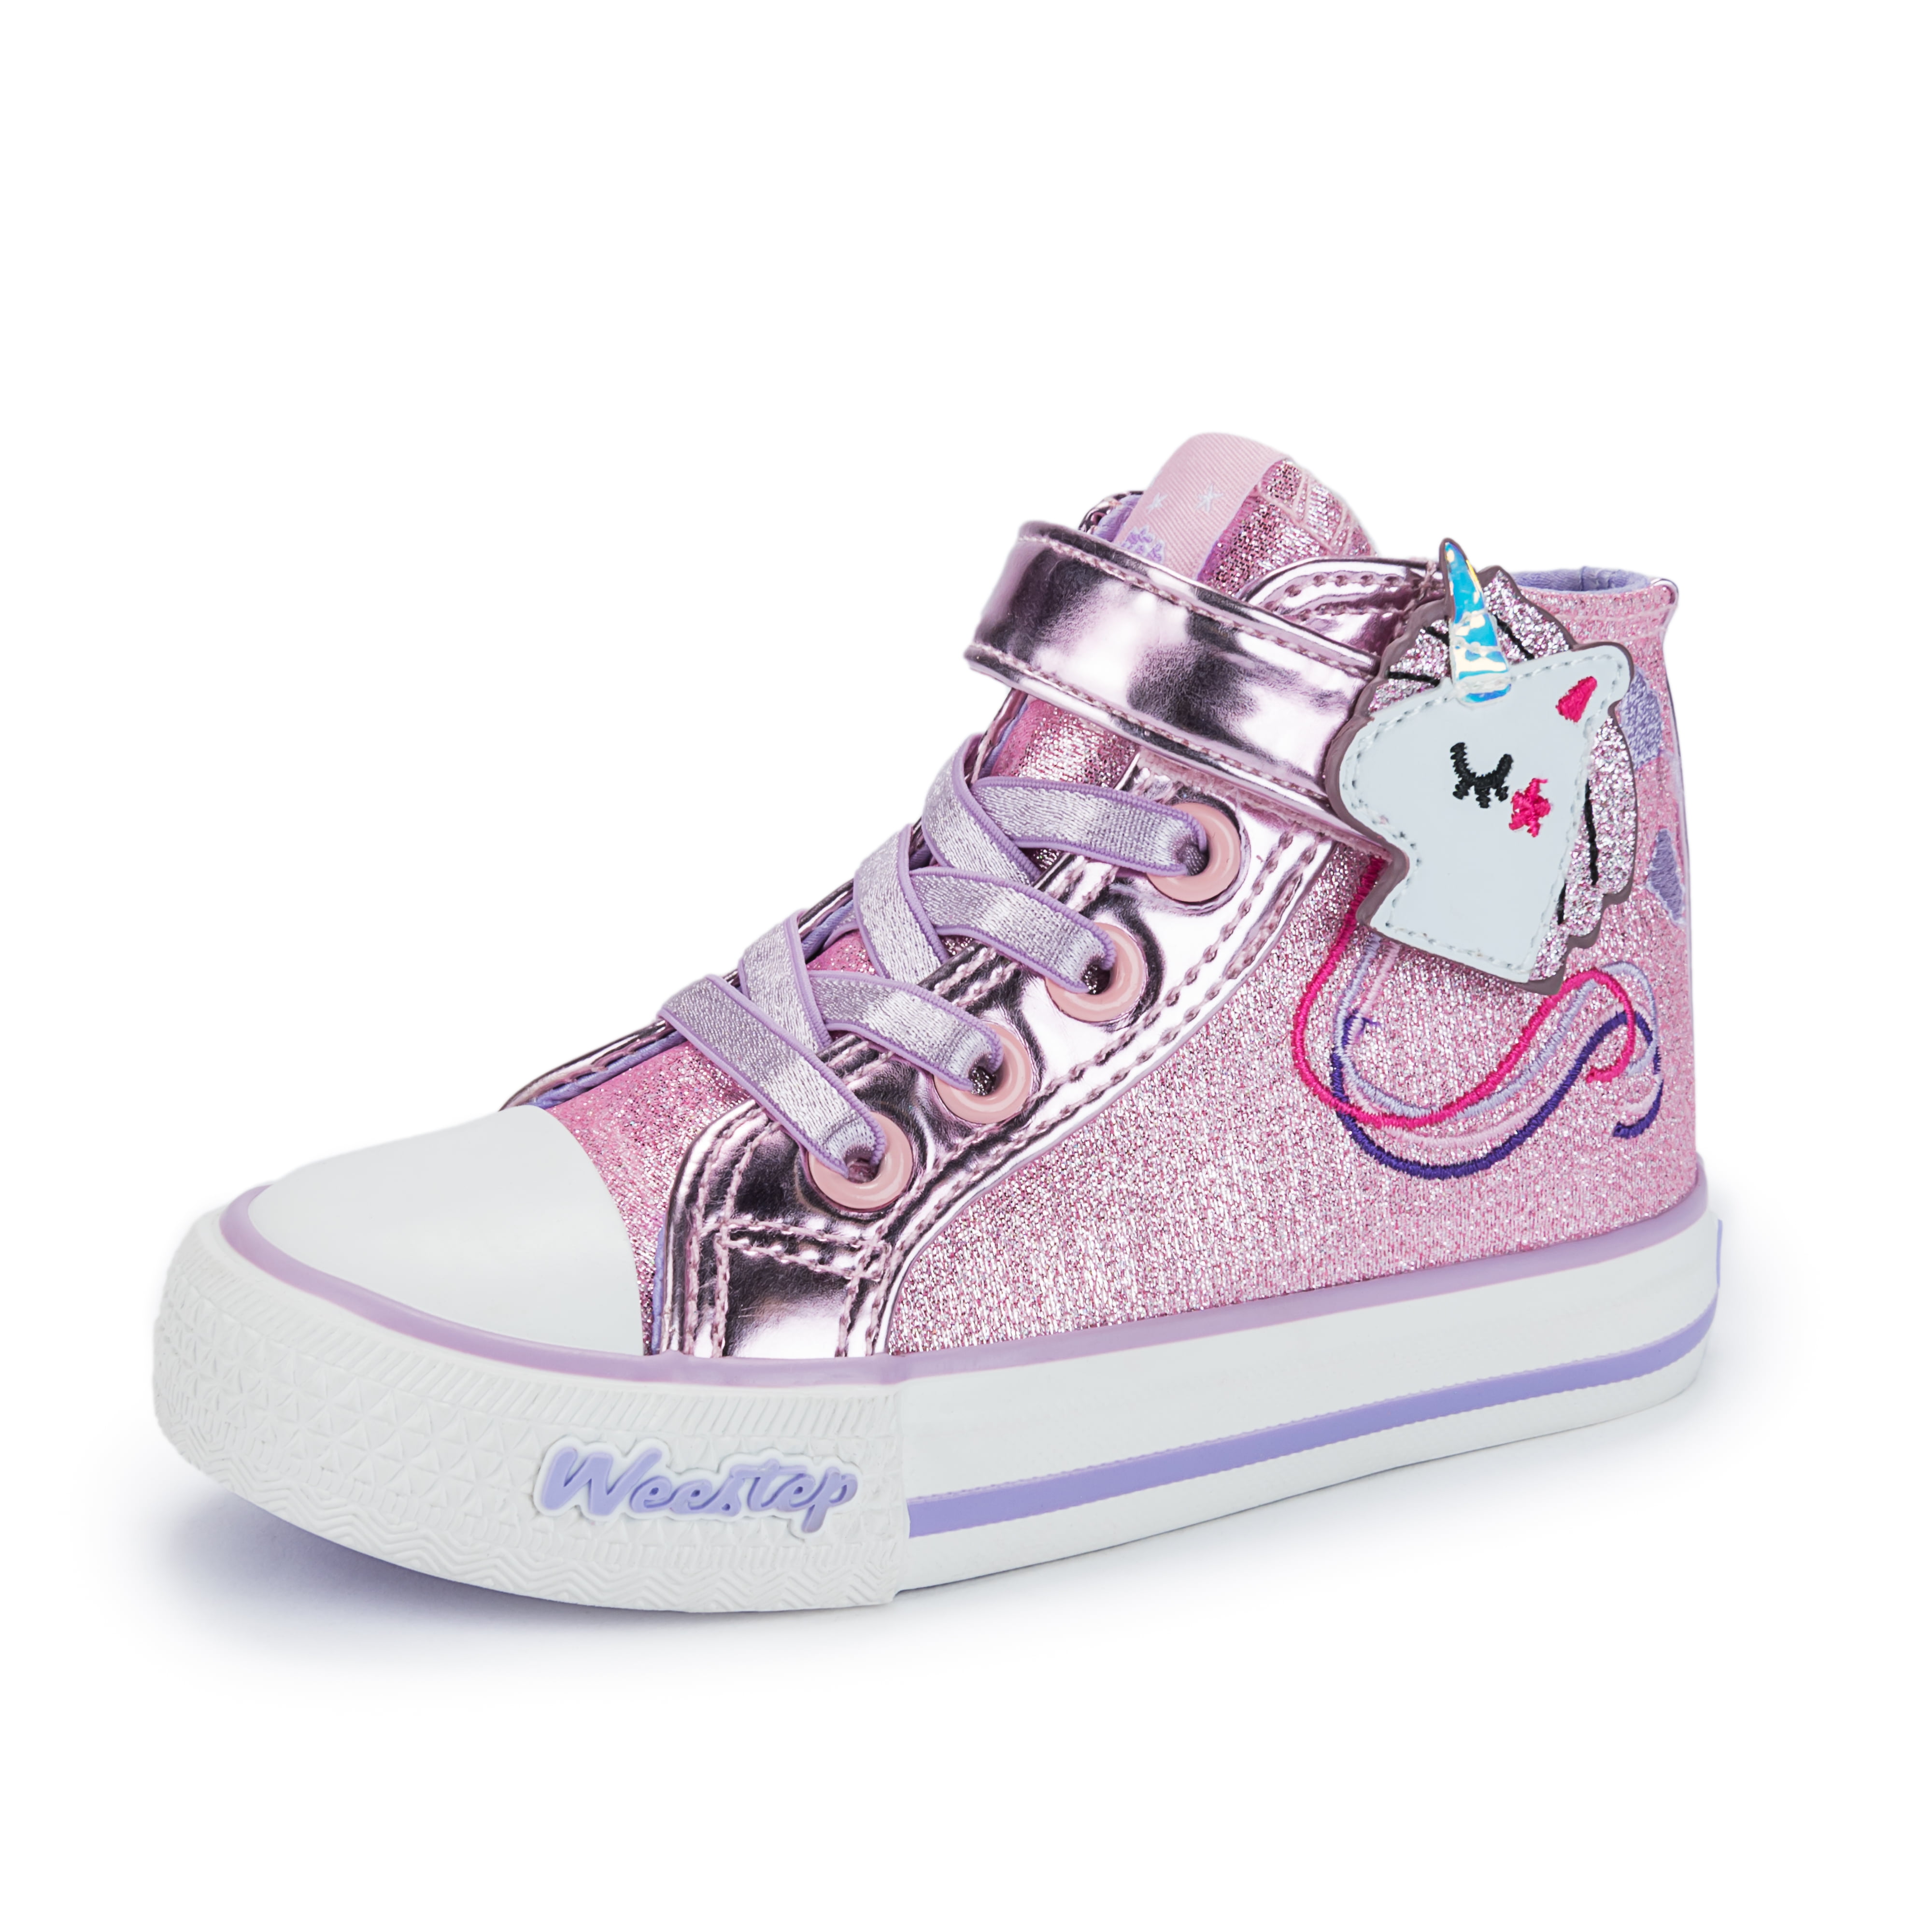 Weestep - Weestep Toddler Little Kid Girls Glitter Bow Sneakers ...